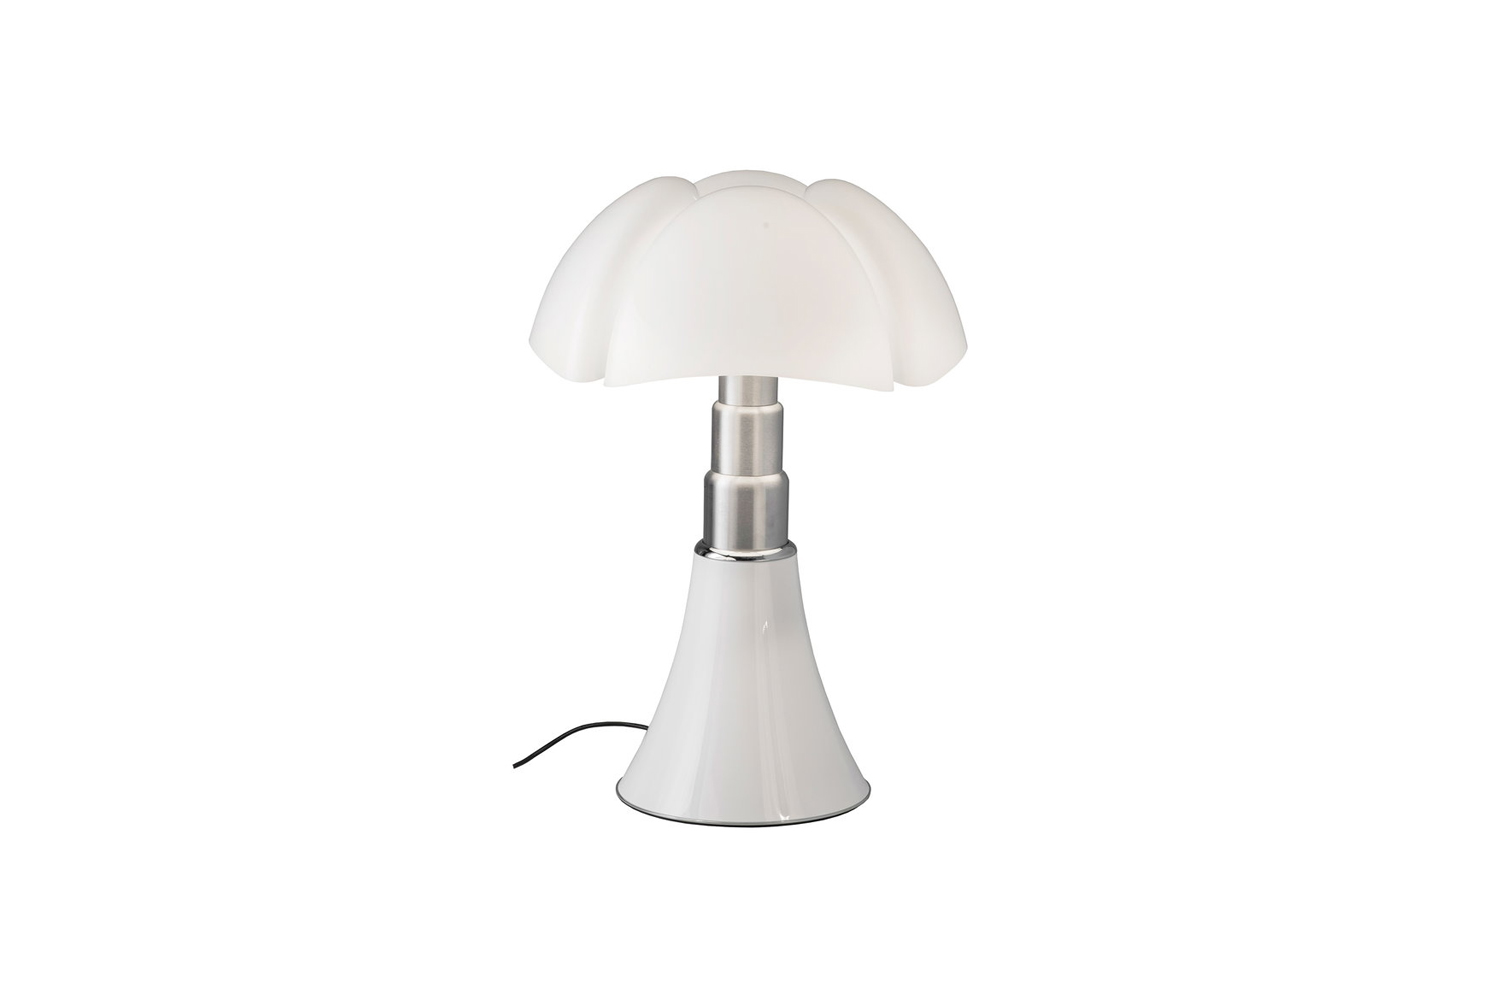 the luce pipistrello table lamp in white, designed by gae aulenti for martinell 16